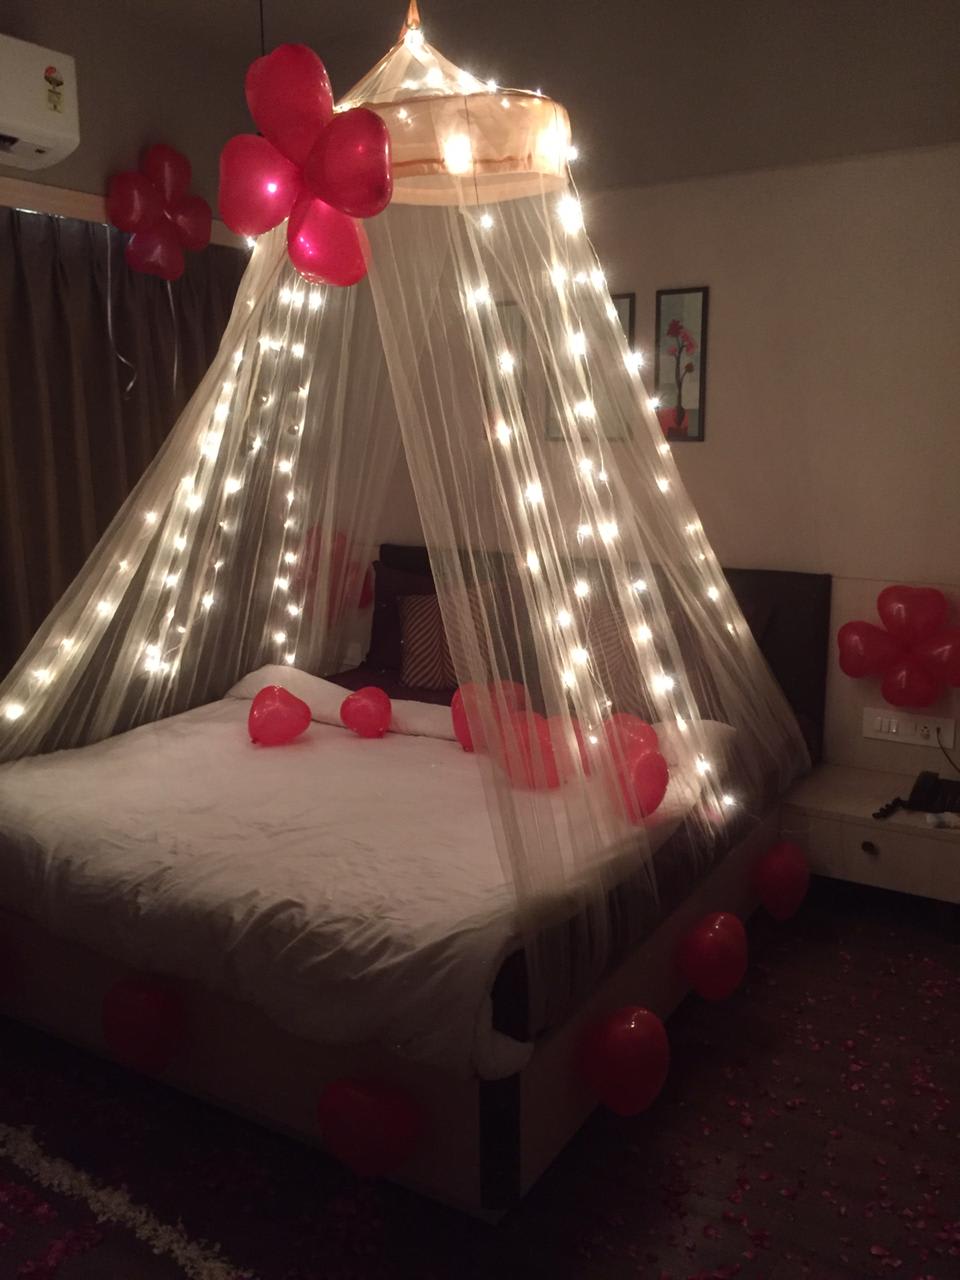 Honeymoon Decoration - Decorated Rooms For your Celebrations - Sk ...